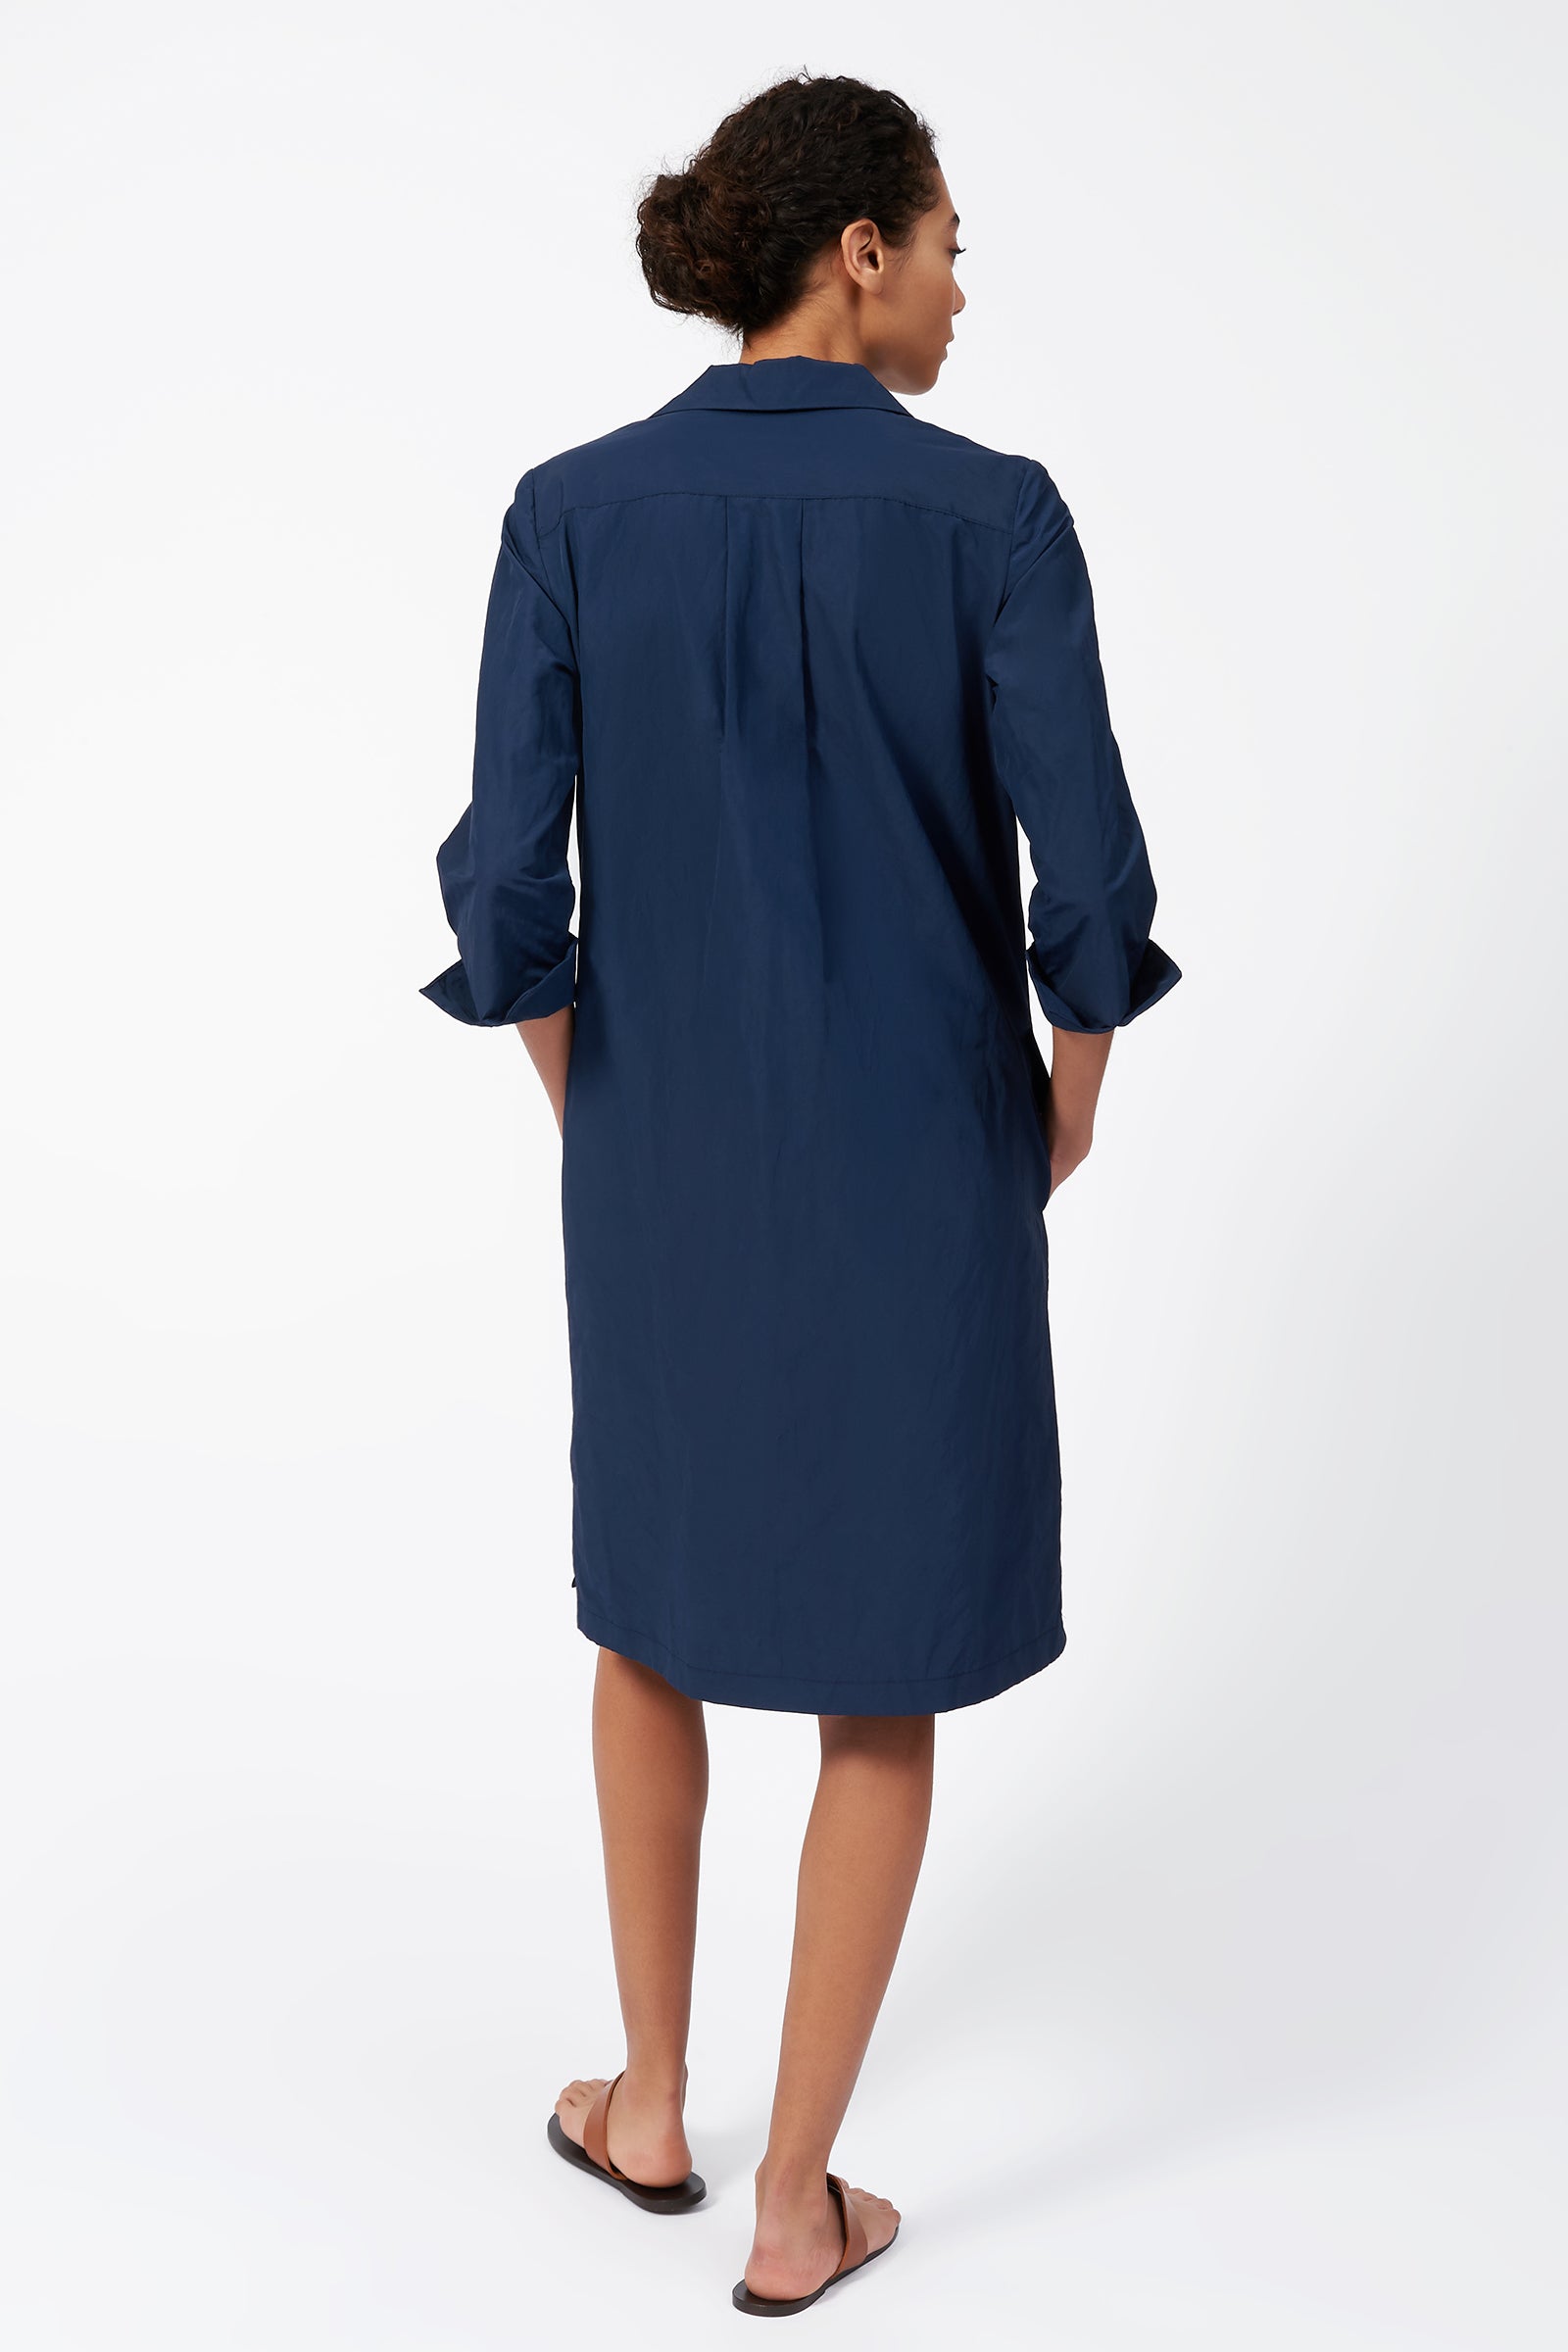 Kal Rieman Cecil Collared V-Neck Dress in Summer Navy on model full back view